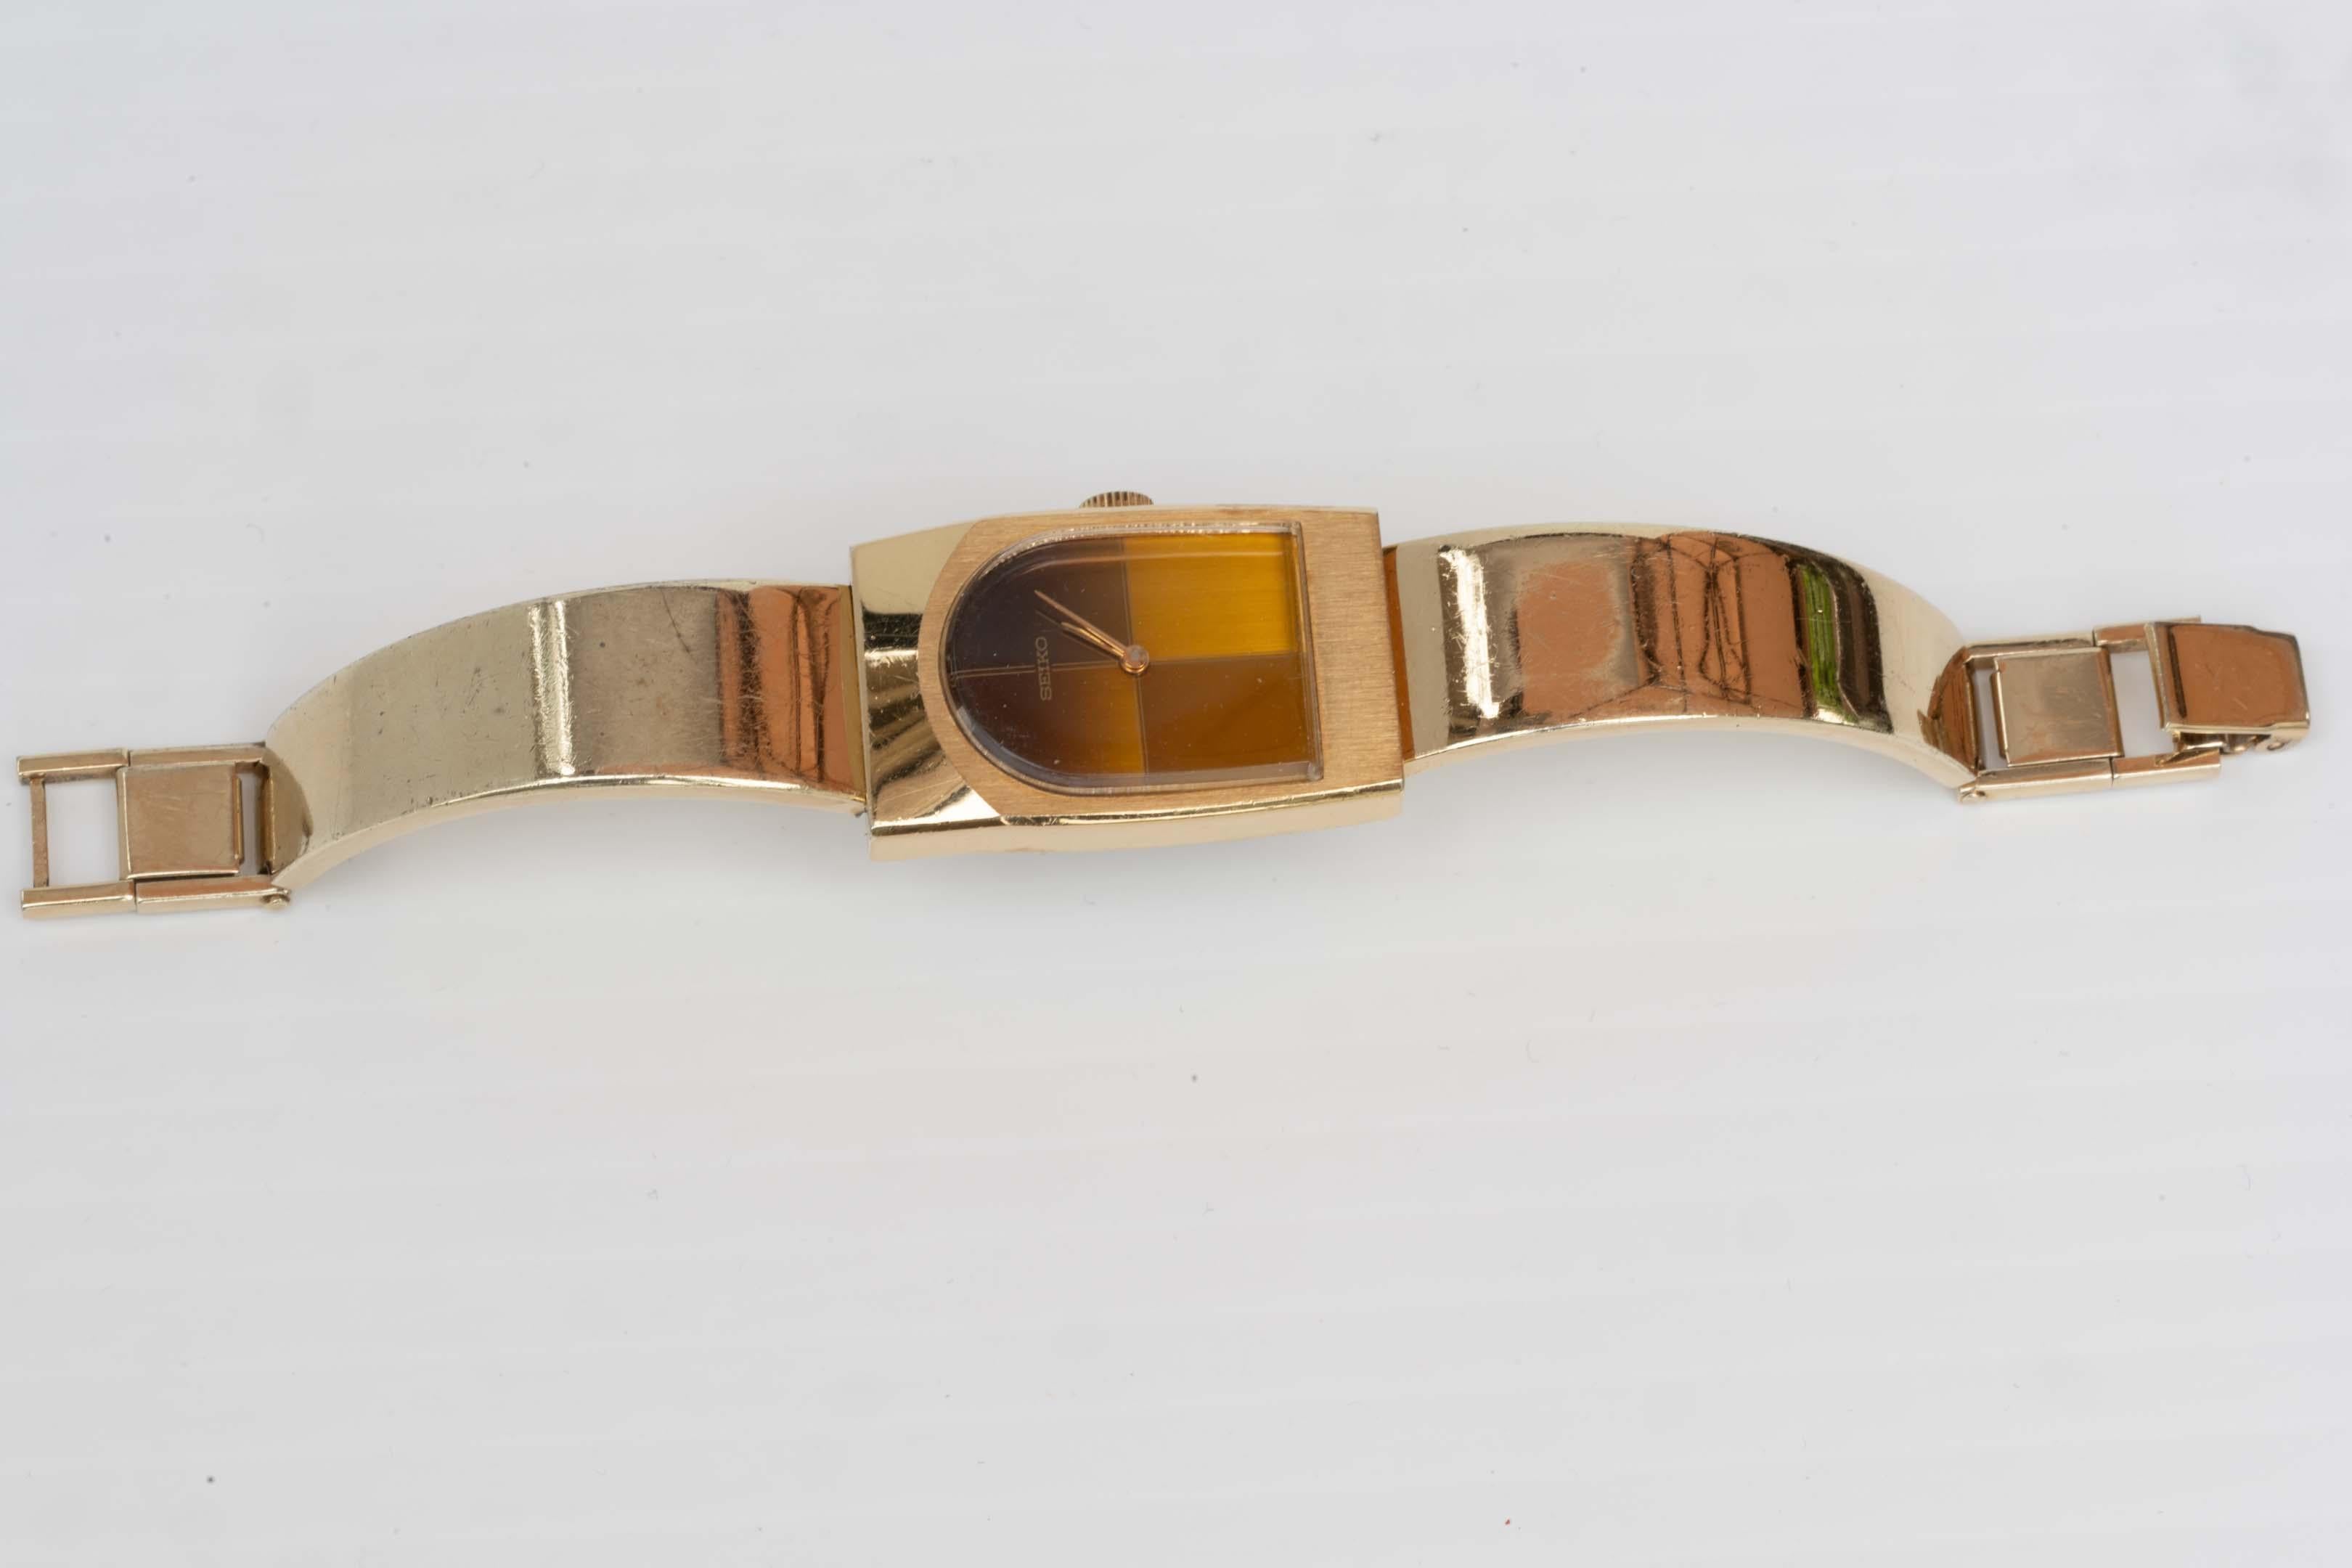 Vintage Seiko rectangular shaped hand winding ladies watch ref 11-8349. Gold tone on a metal base, the case measures 31mm x 21mm including the crown. Will fit a 5 1/2 inches wrist. Made in Japan 1980-90, in working order. In good condition.